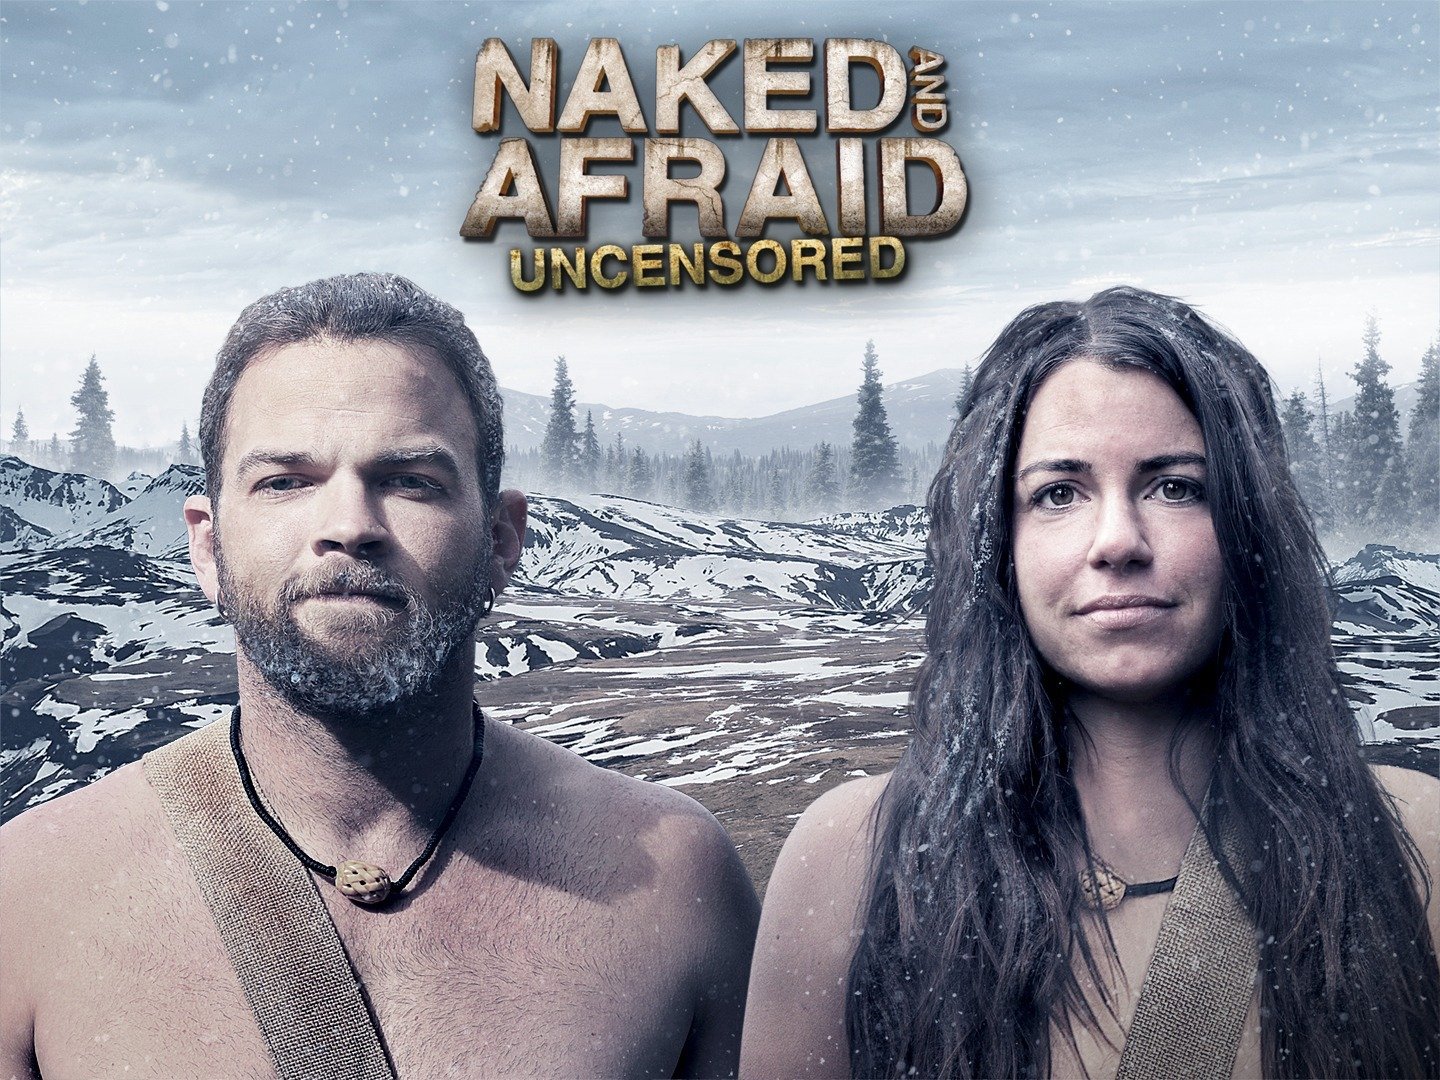 Naked and afraid unsensoted